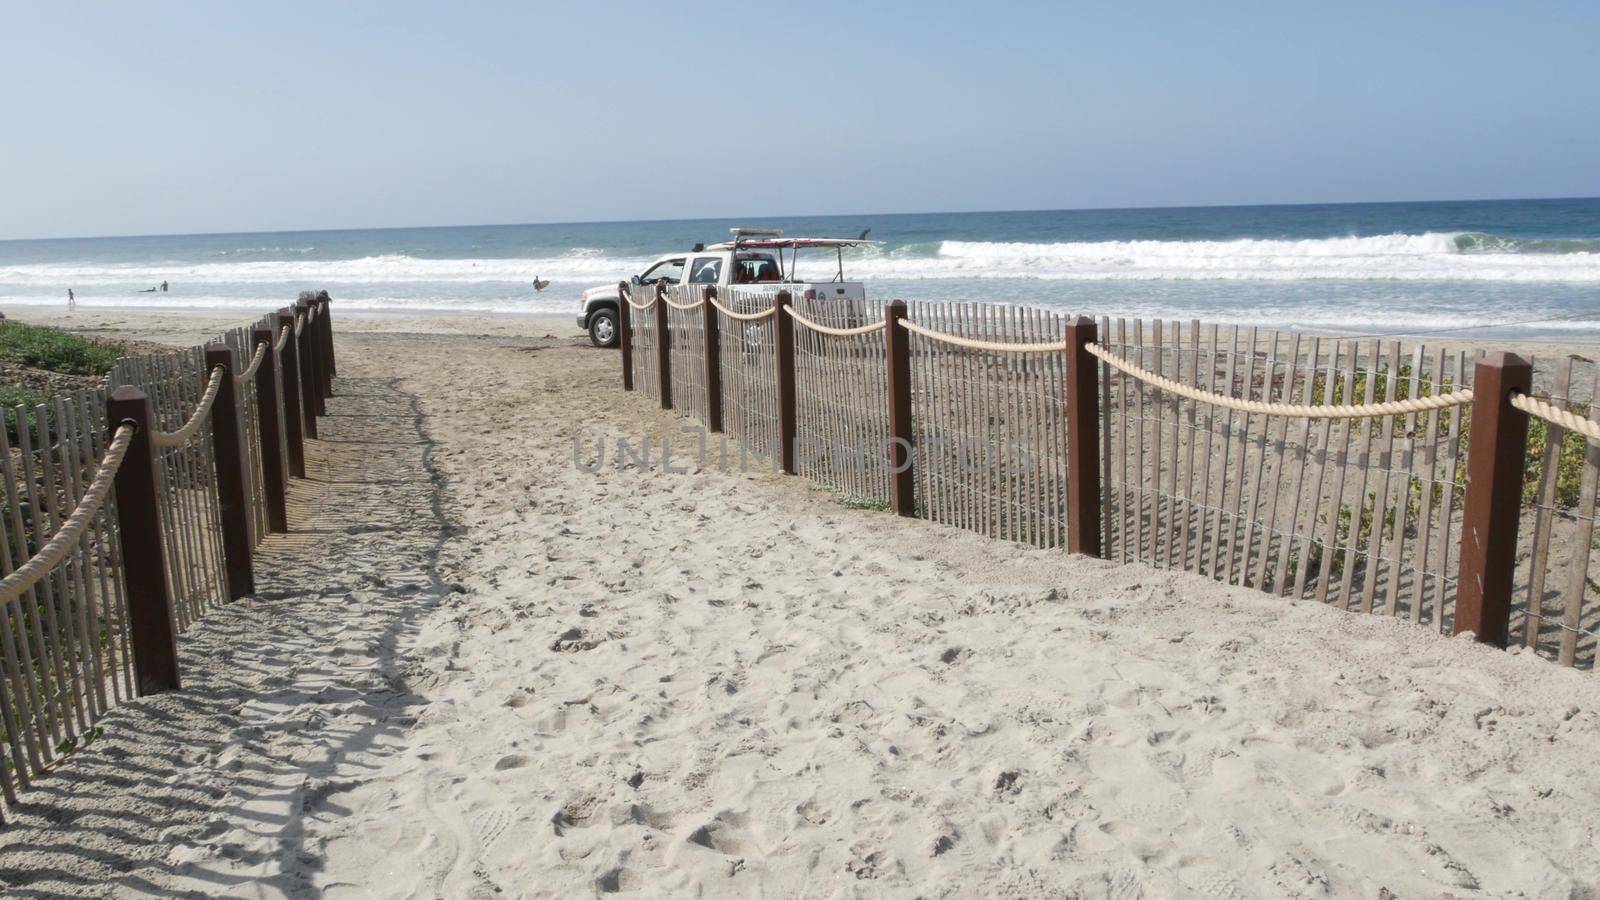 Encinitas, California USA - 23 Feb 2020: Pacific coast, people walking on ocean beach by sea water waves. Coastal access with picket fence on sandy shore near San Diego and Los Angeles. Lifeguard car.